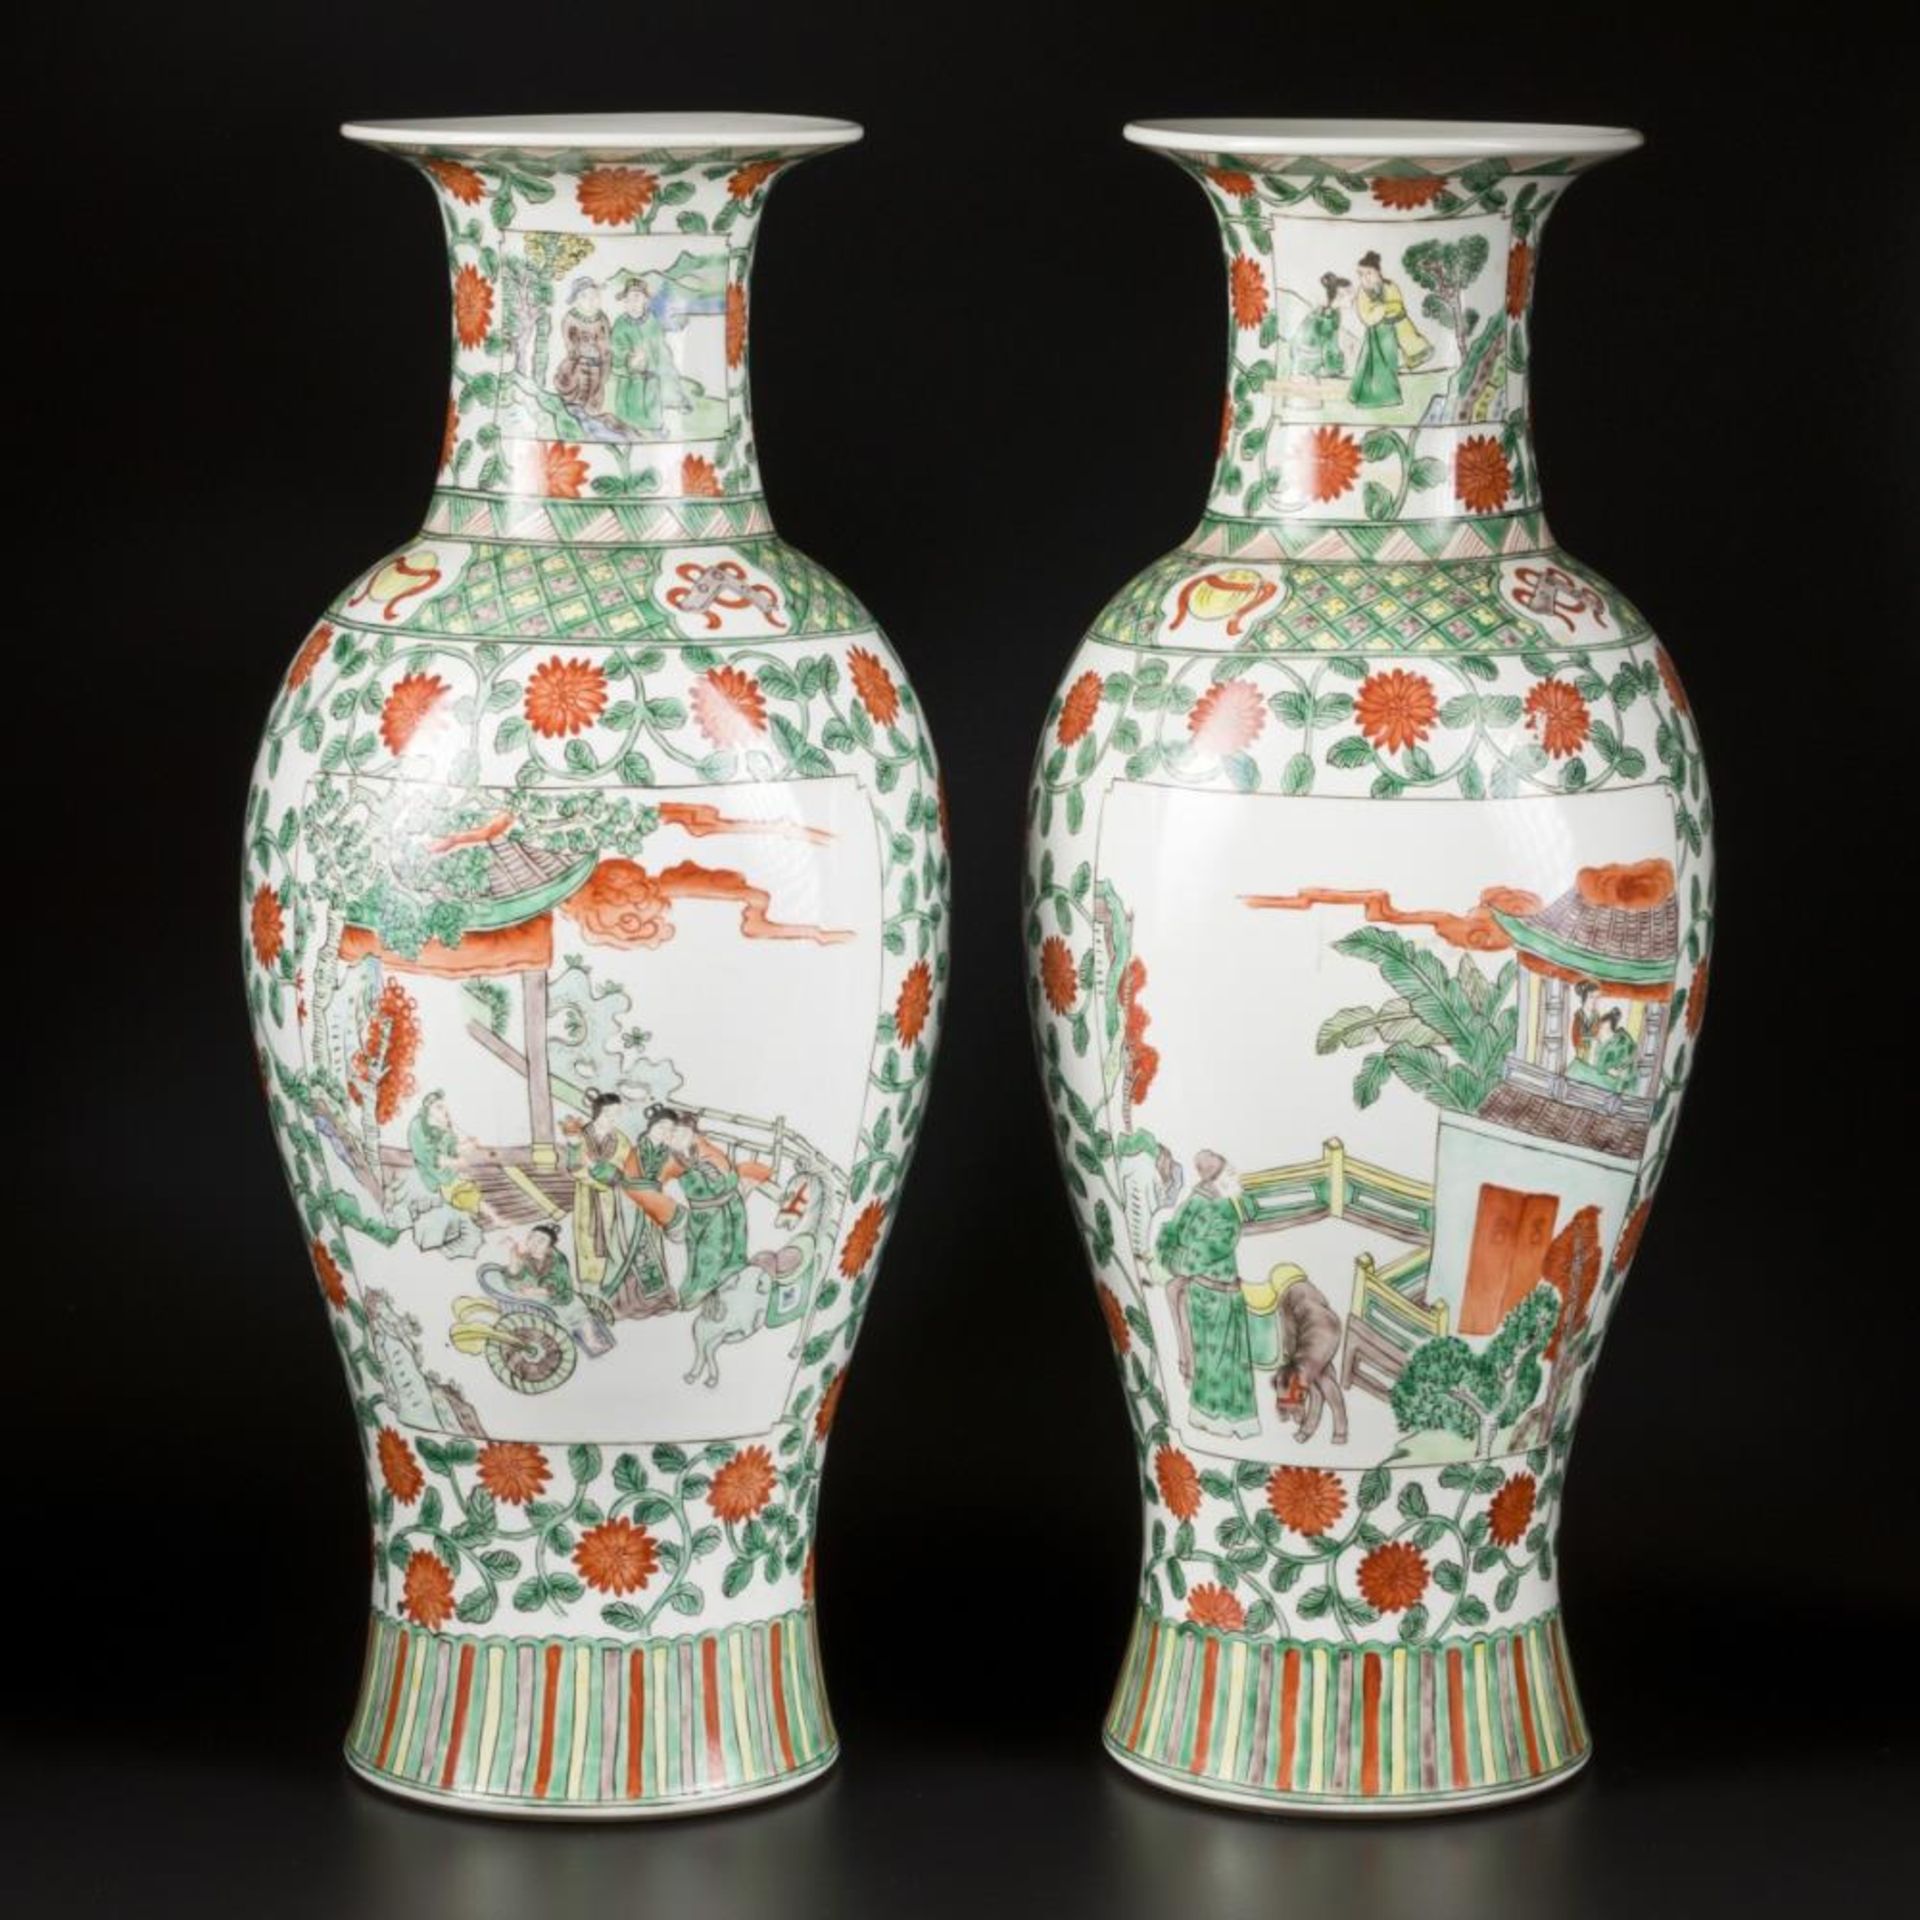 A set of (2) Wucai style porcelain baluster vases (transition-style), China, 20th century. - Image 2 of 8